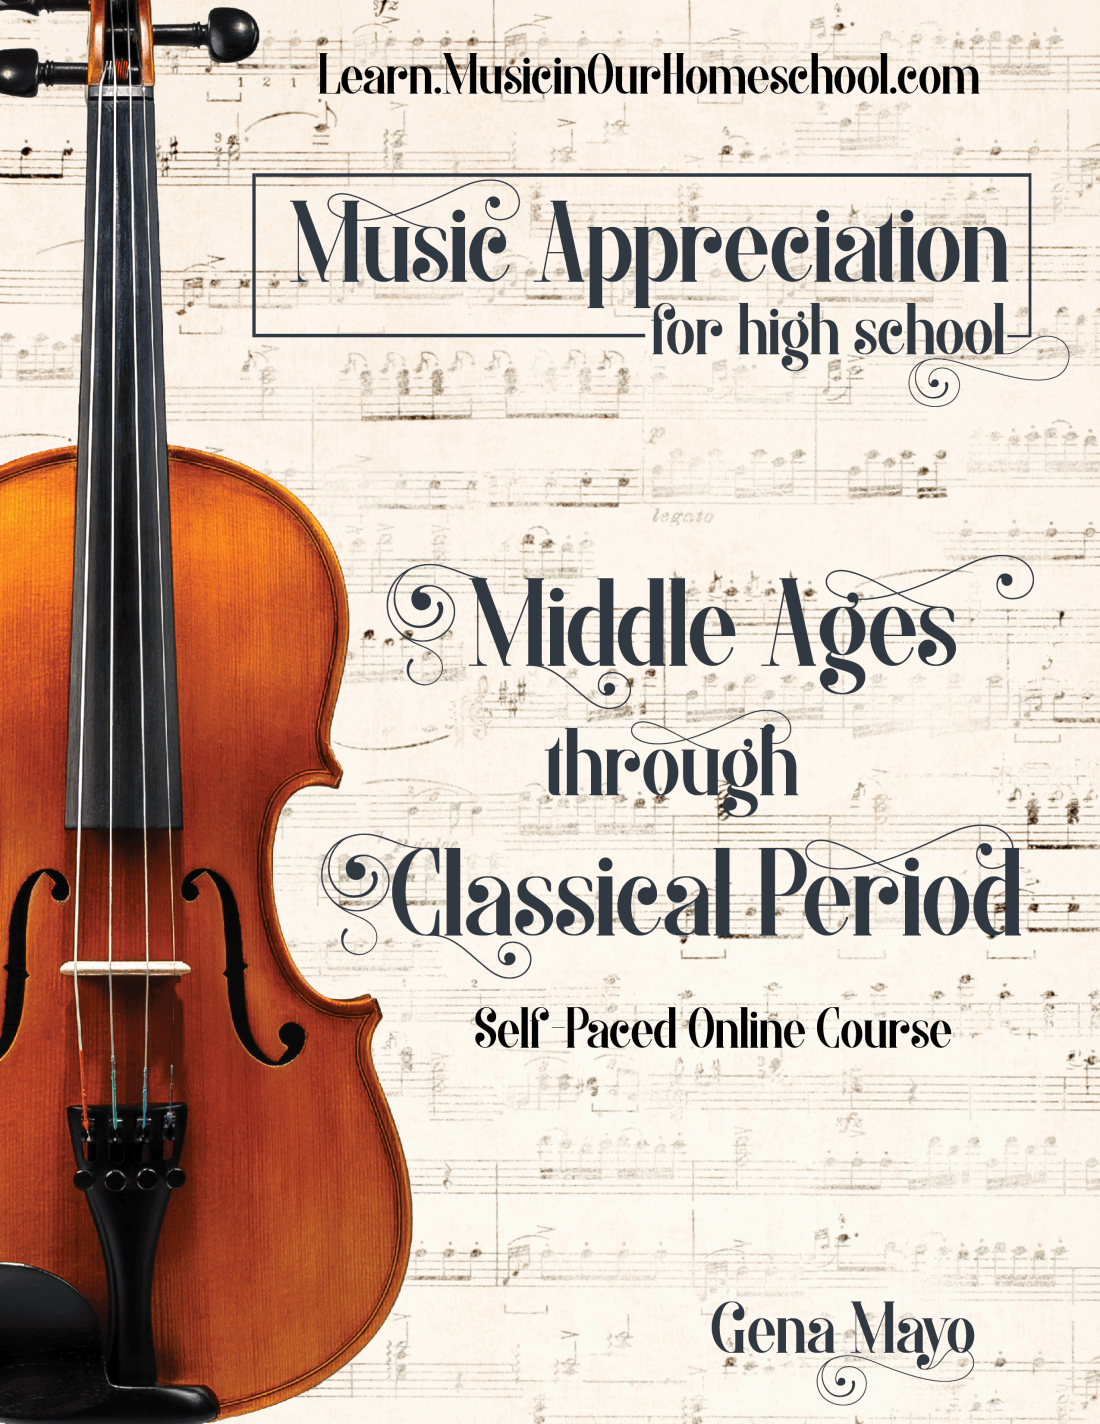 Music Appreciation Middle Ages Through Classical Period self-paced online music course